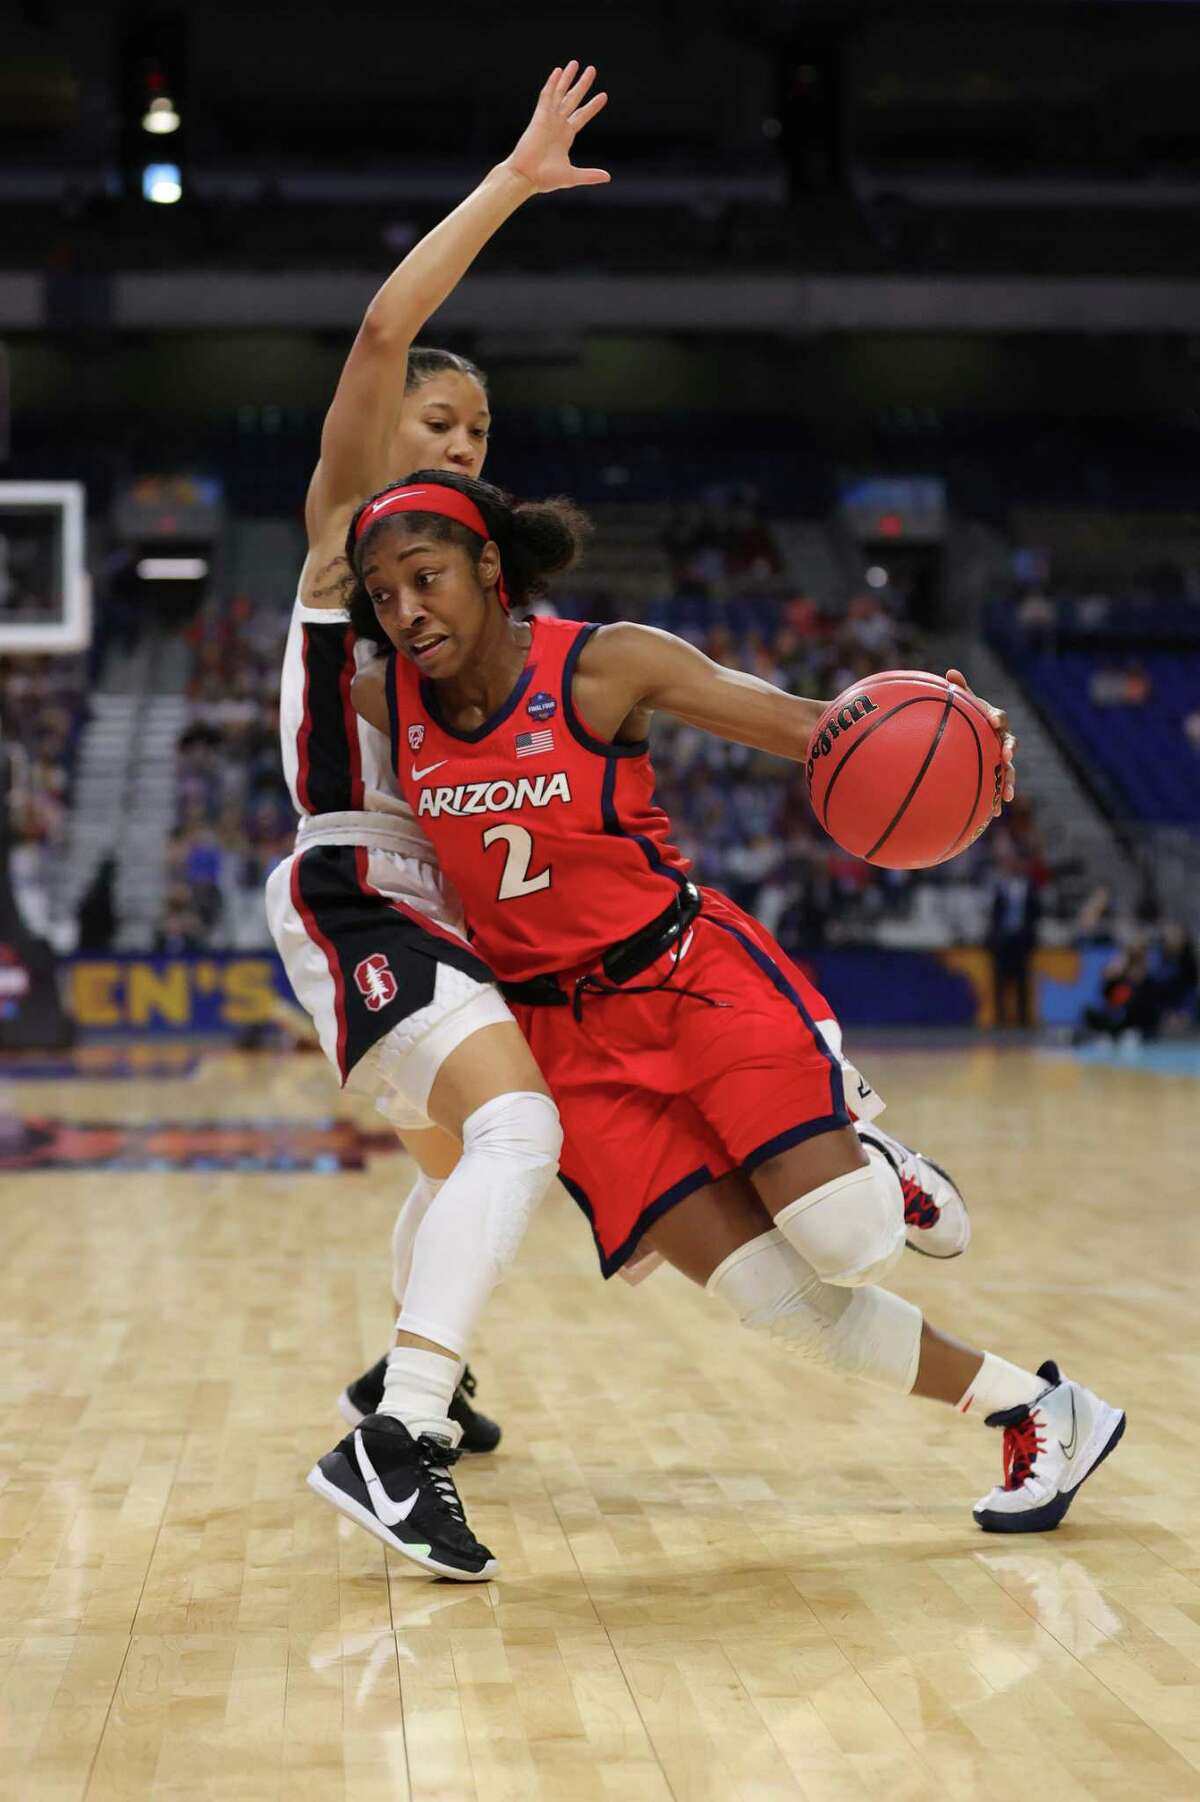 SAN ANTONIO, TEXAS - APRIL 04: Aari McDonald #2 of the Arizona Wildcats drives to the basket against the Stanford Cardinal in the National Championship game of the 2021 NCAA Women's Basketball Tournament at the Alamodome on April 04, 2021 in San Antonio, Texas. (Photo by Carmen Mandato/Getty Images)